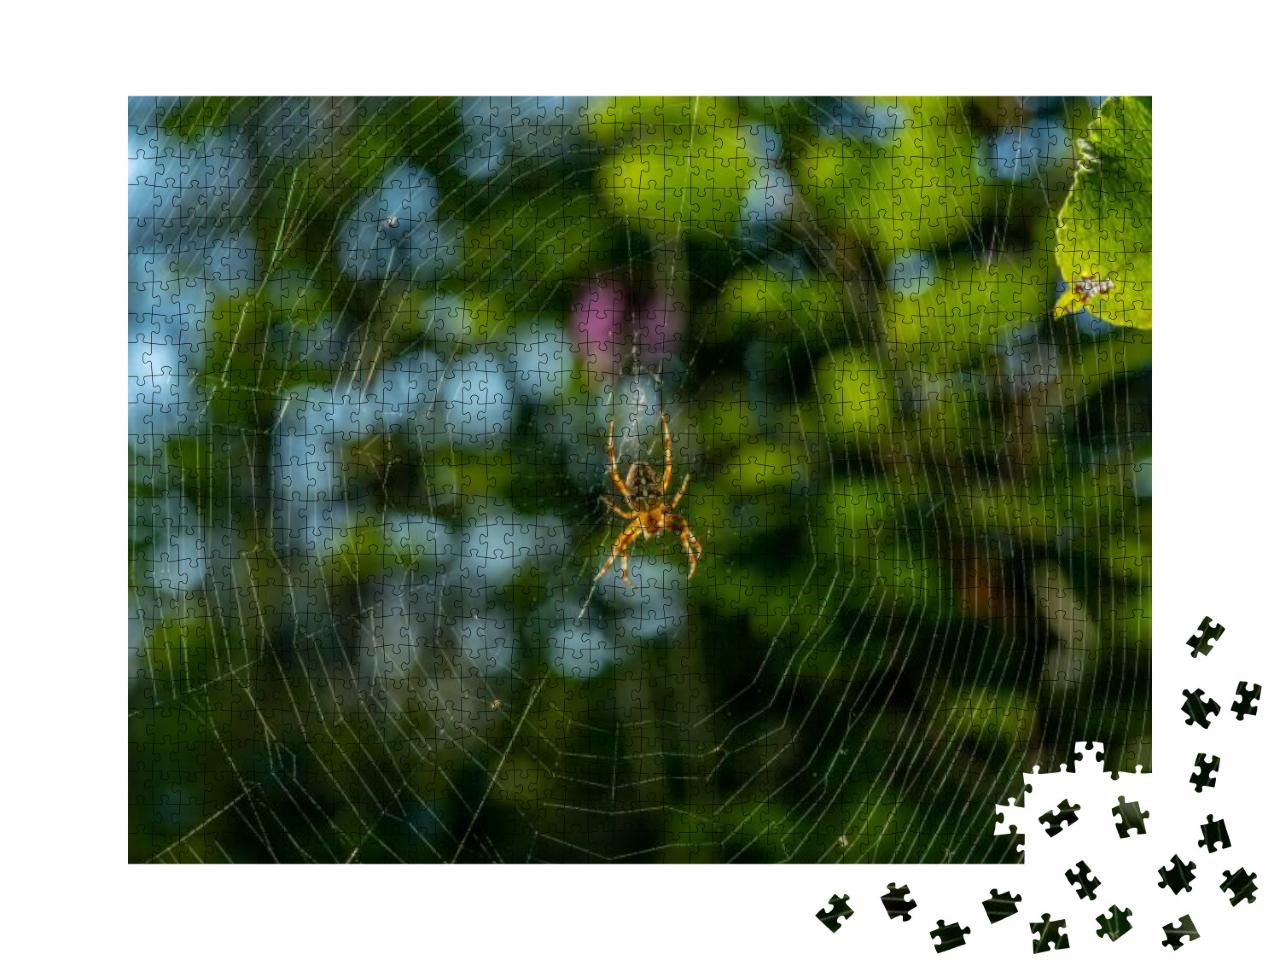 Detailed Close Up of a Large Garden Spider or Cross Spide... Jigsaw Puzzle with 1000 pieces